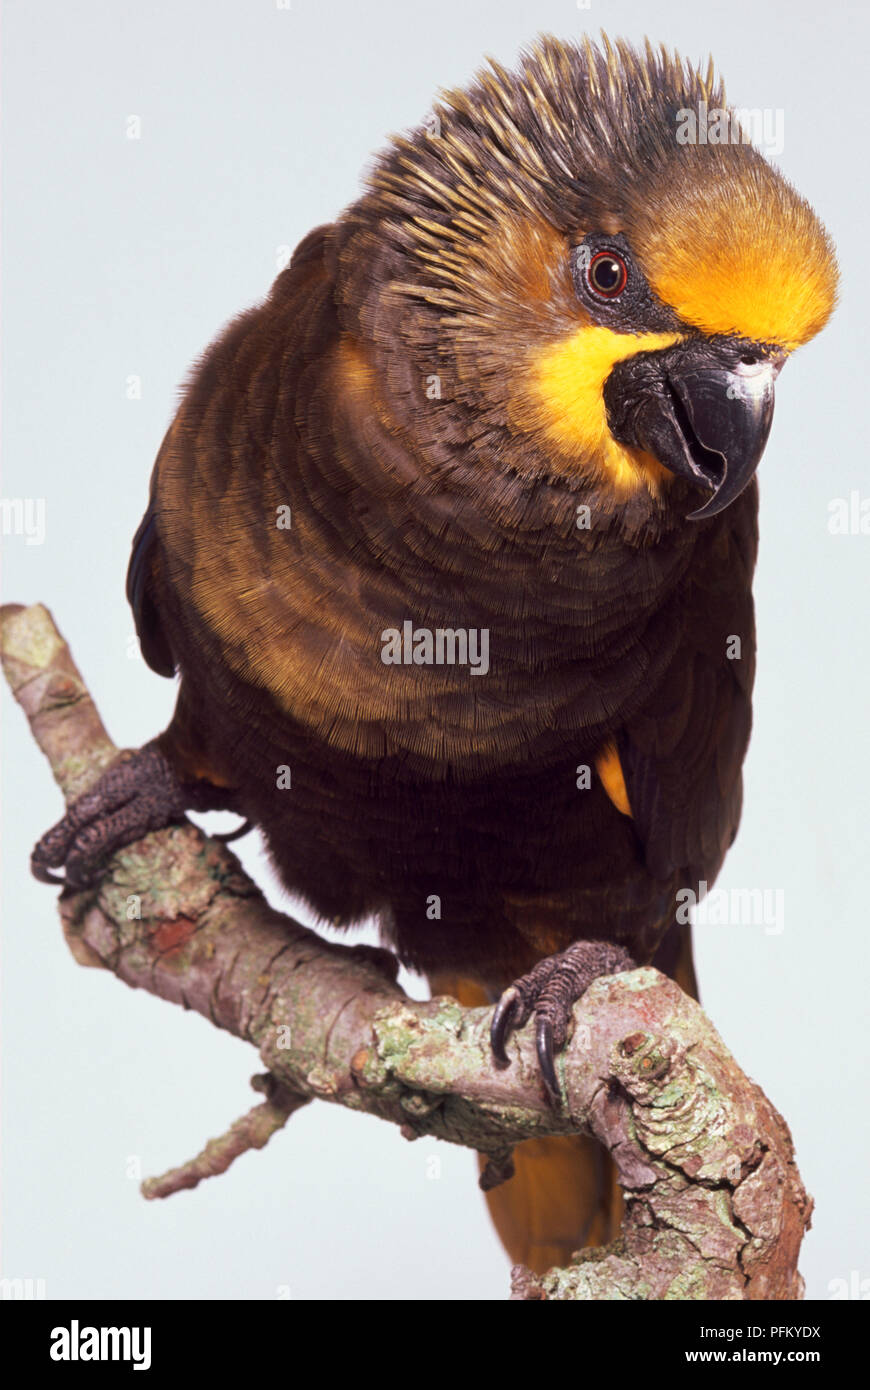 Front view of a Duyvenbode's Lory with head in profile, perching on a branch, showing the head crest ruffled with excitement, yellow wing patch, short legs and strong feet of a tree-dweller. Stock Photo